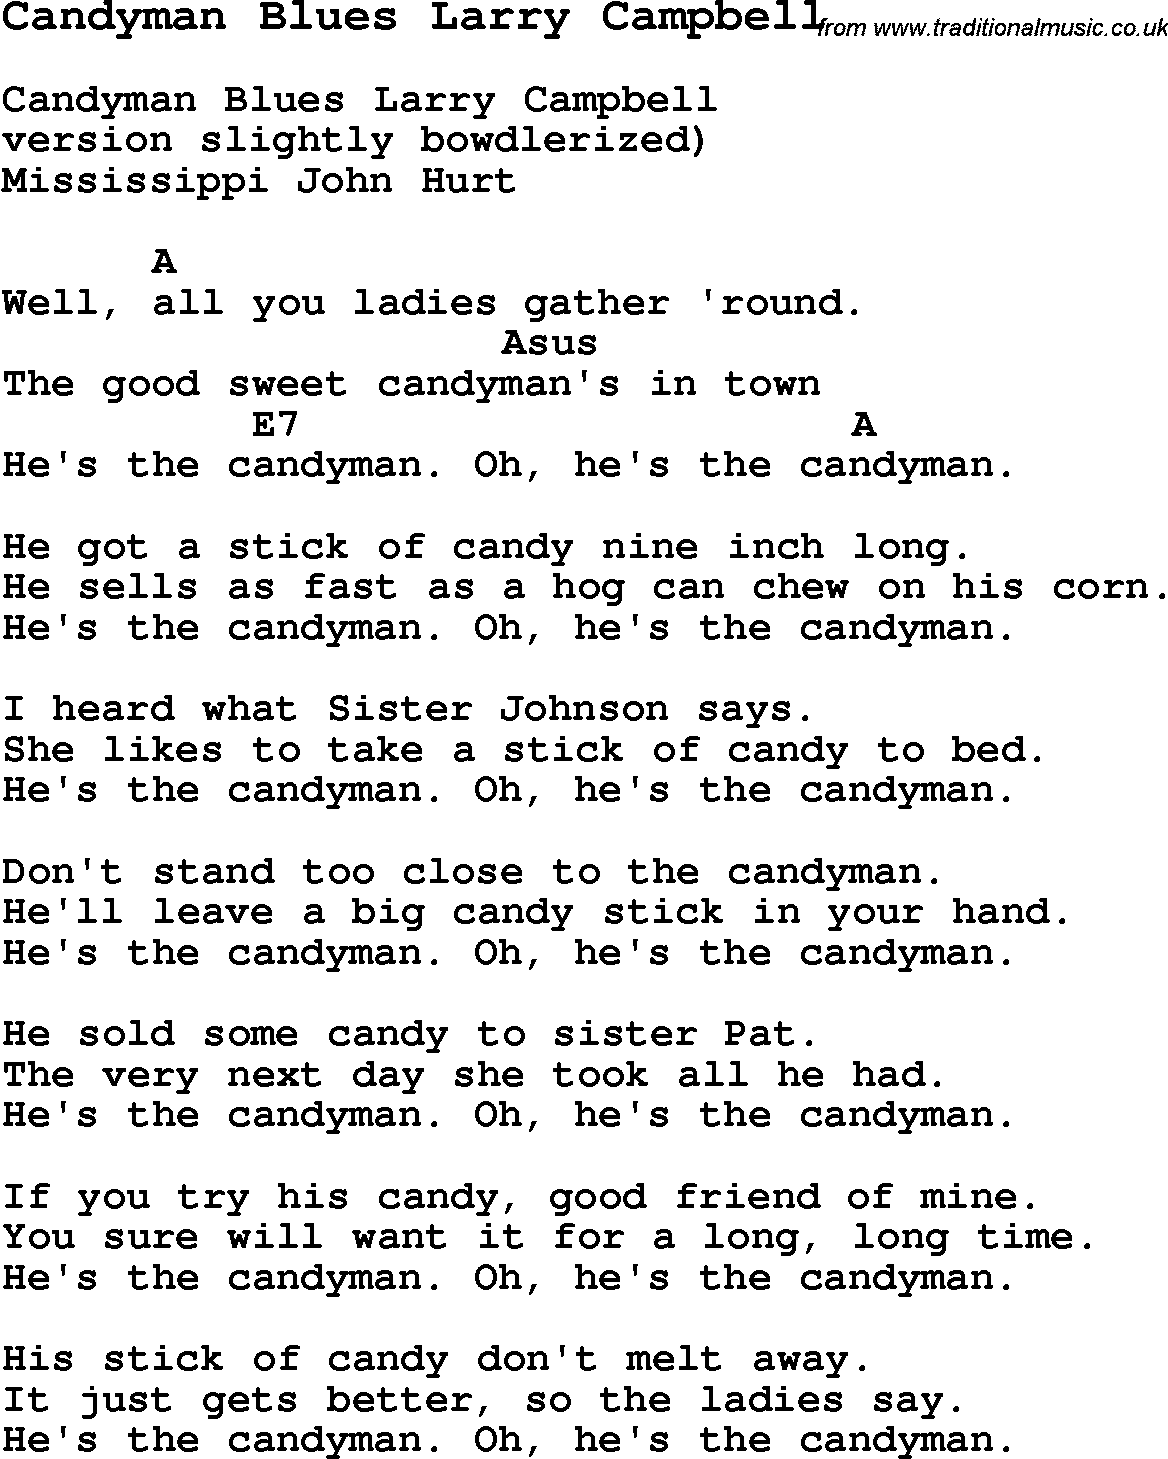 Blues Guitar Song, lyrics, chords, tablature, playing hints for Candyman Blues Larry Campbell